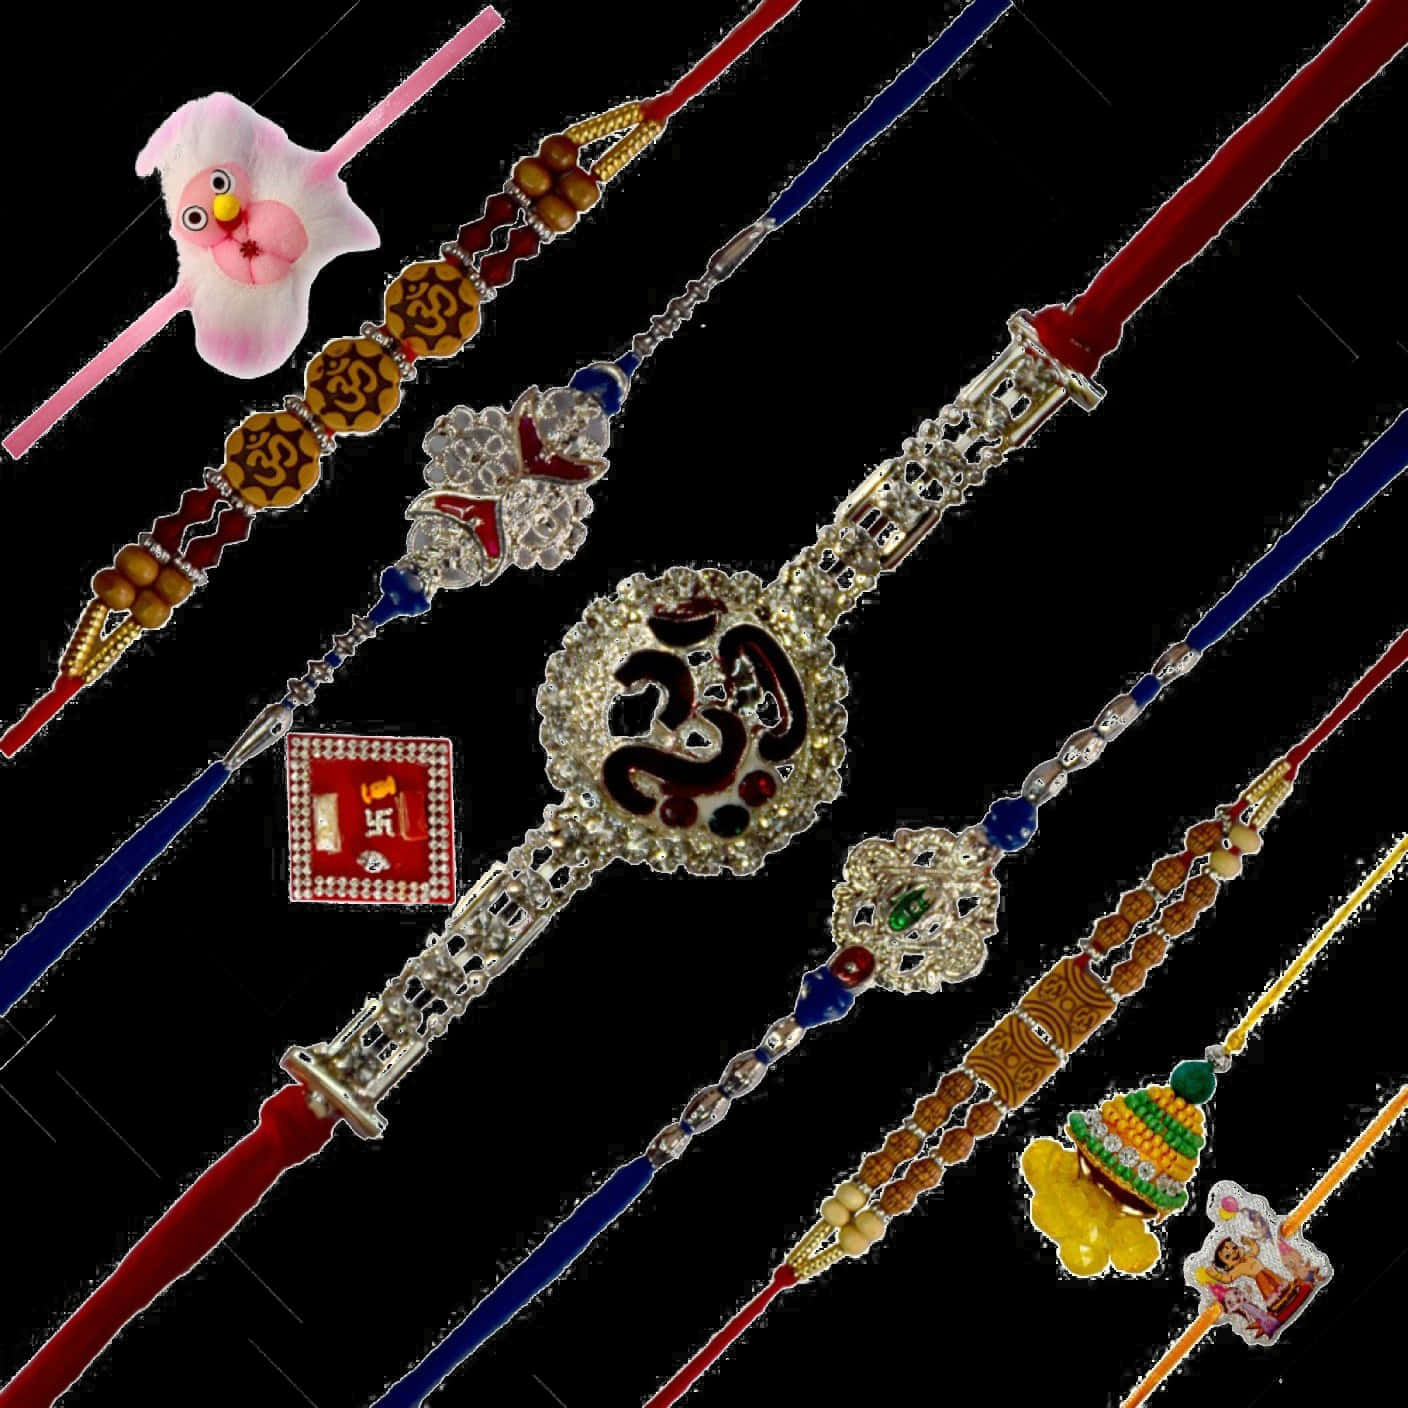 A Group Of Bracelets With Different Designs